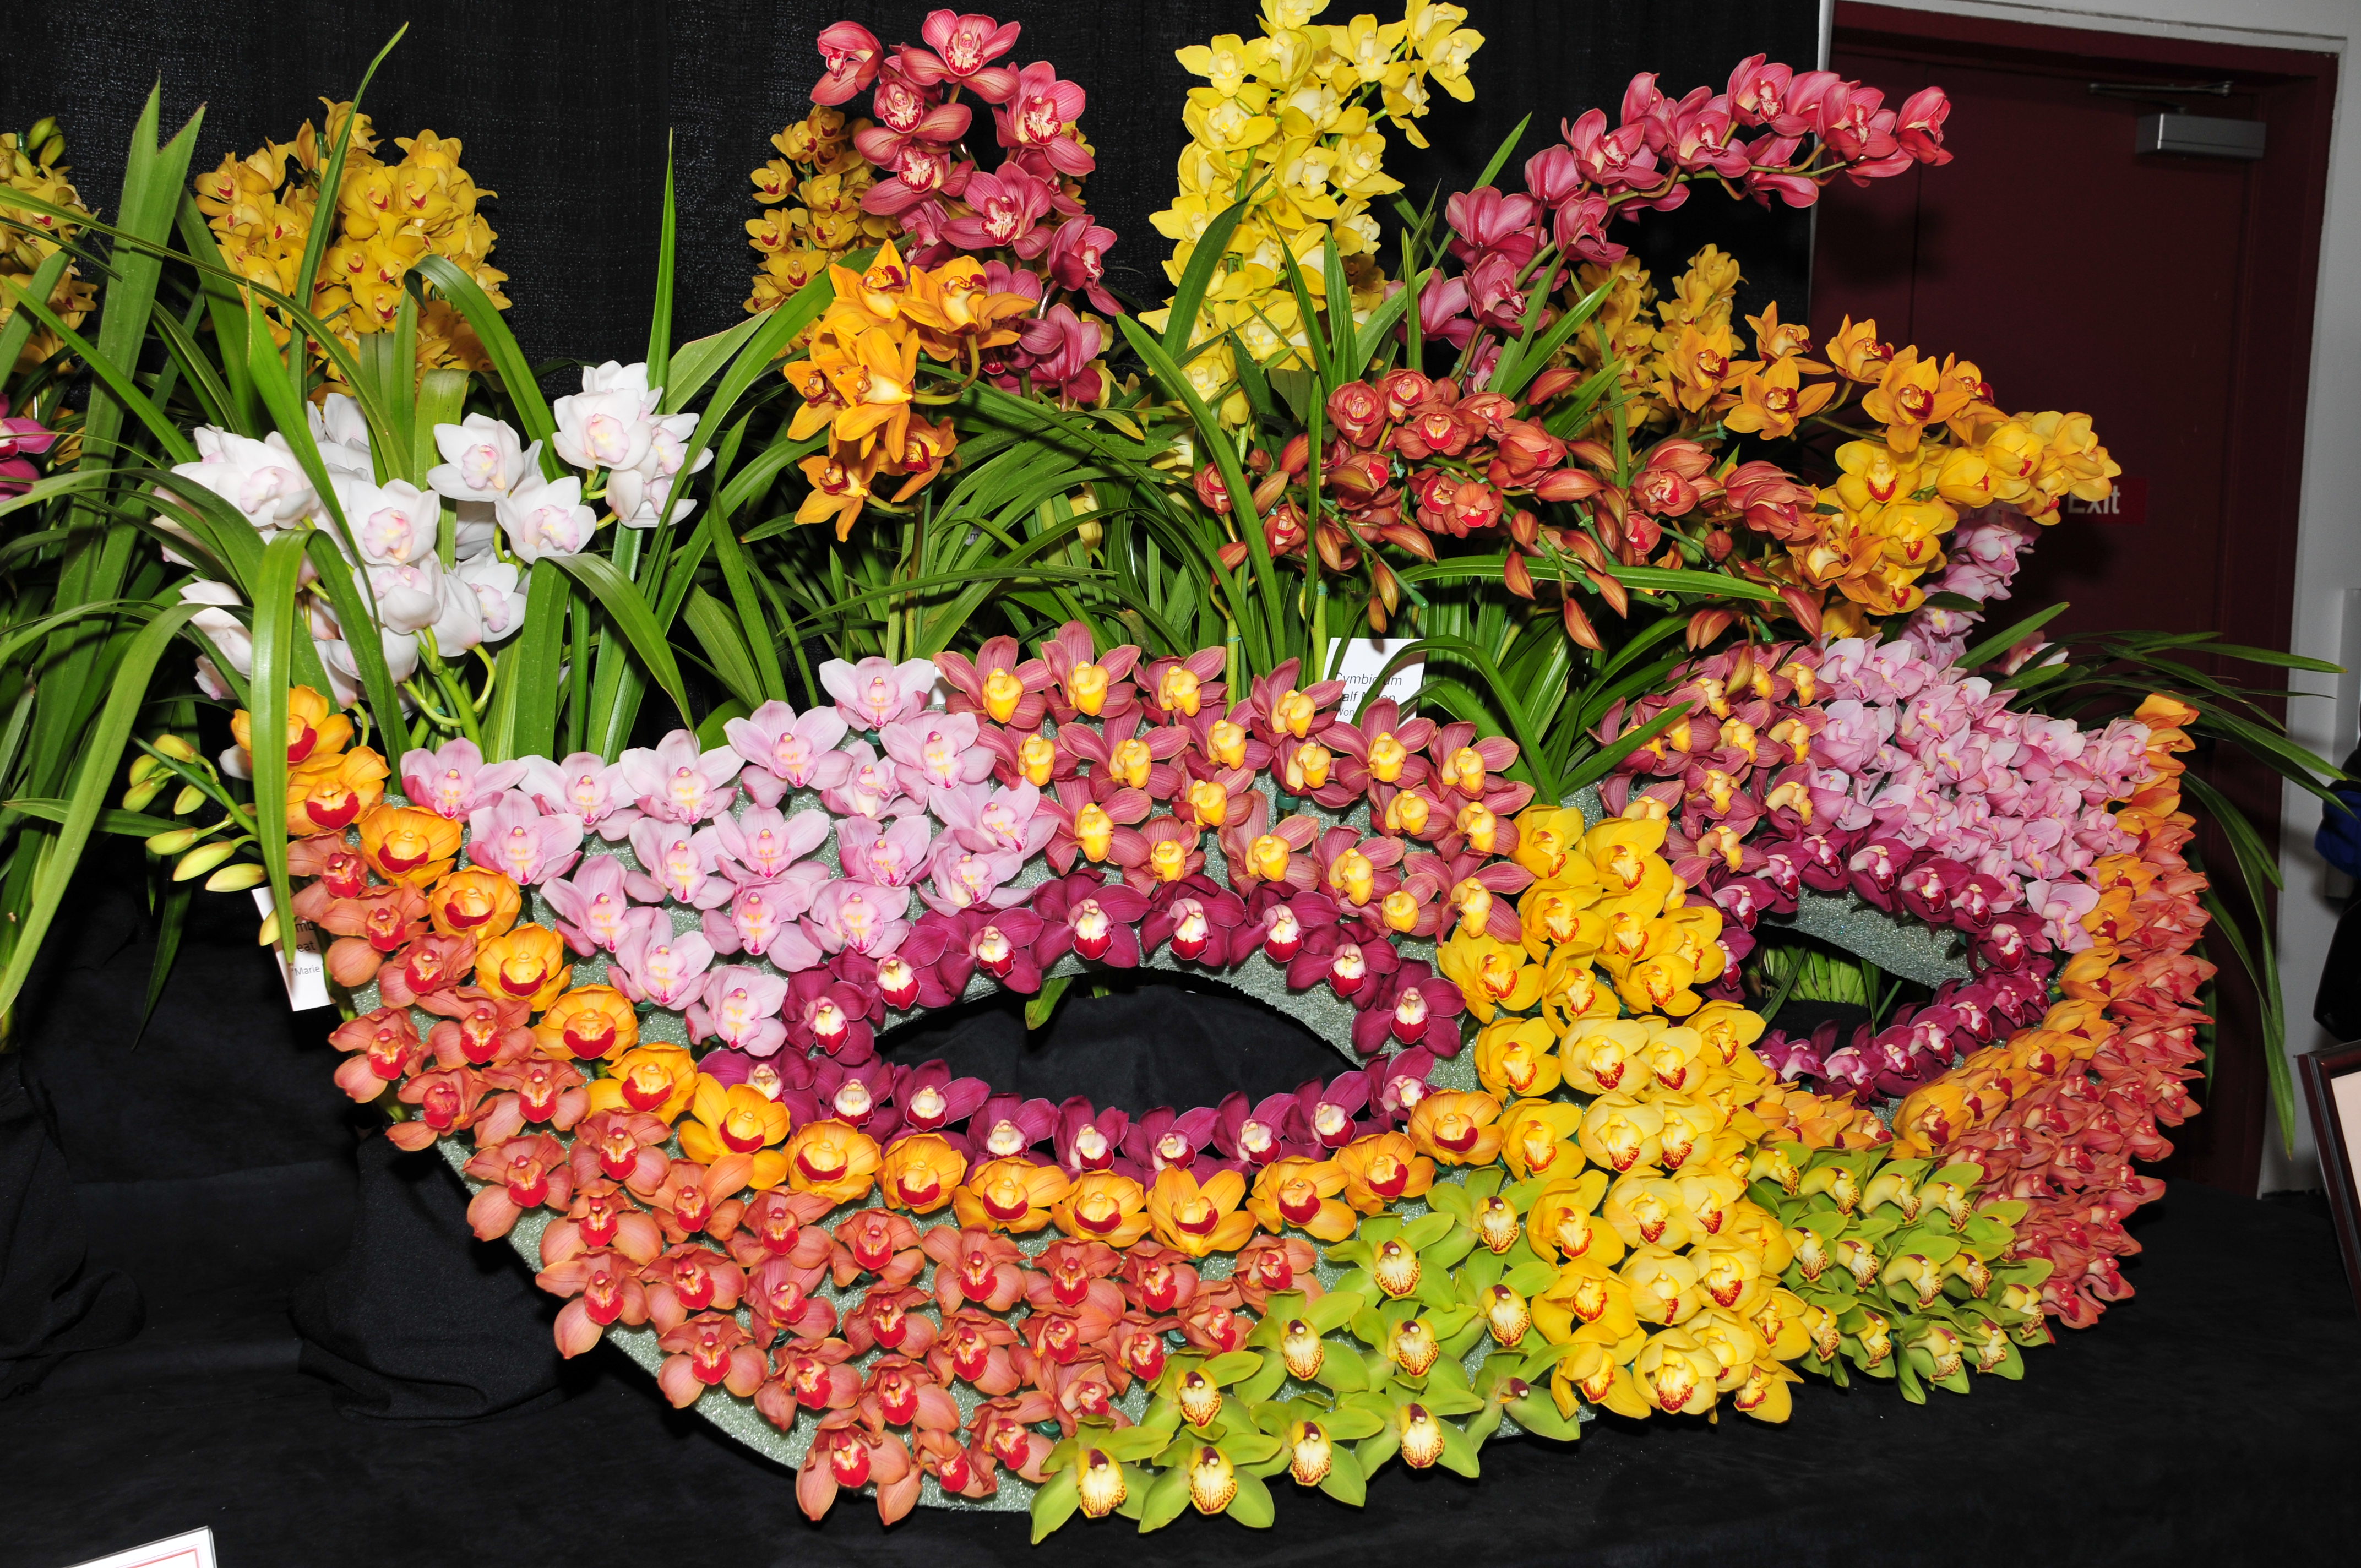 20-facts-about-pacific-orchid-exposition